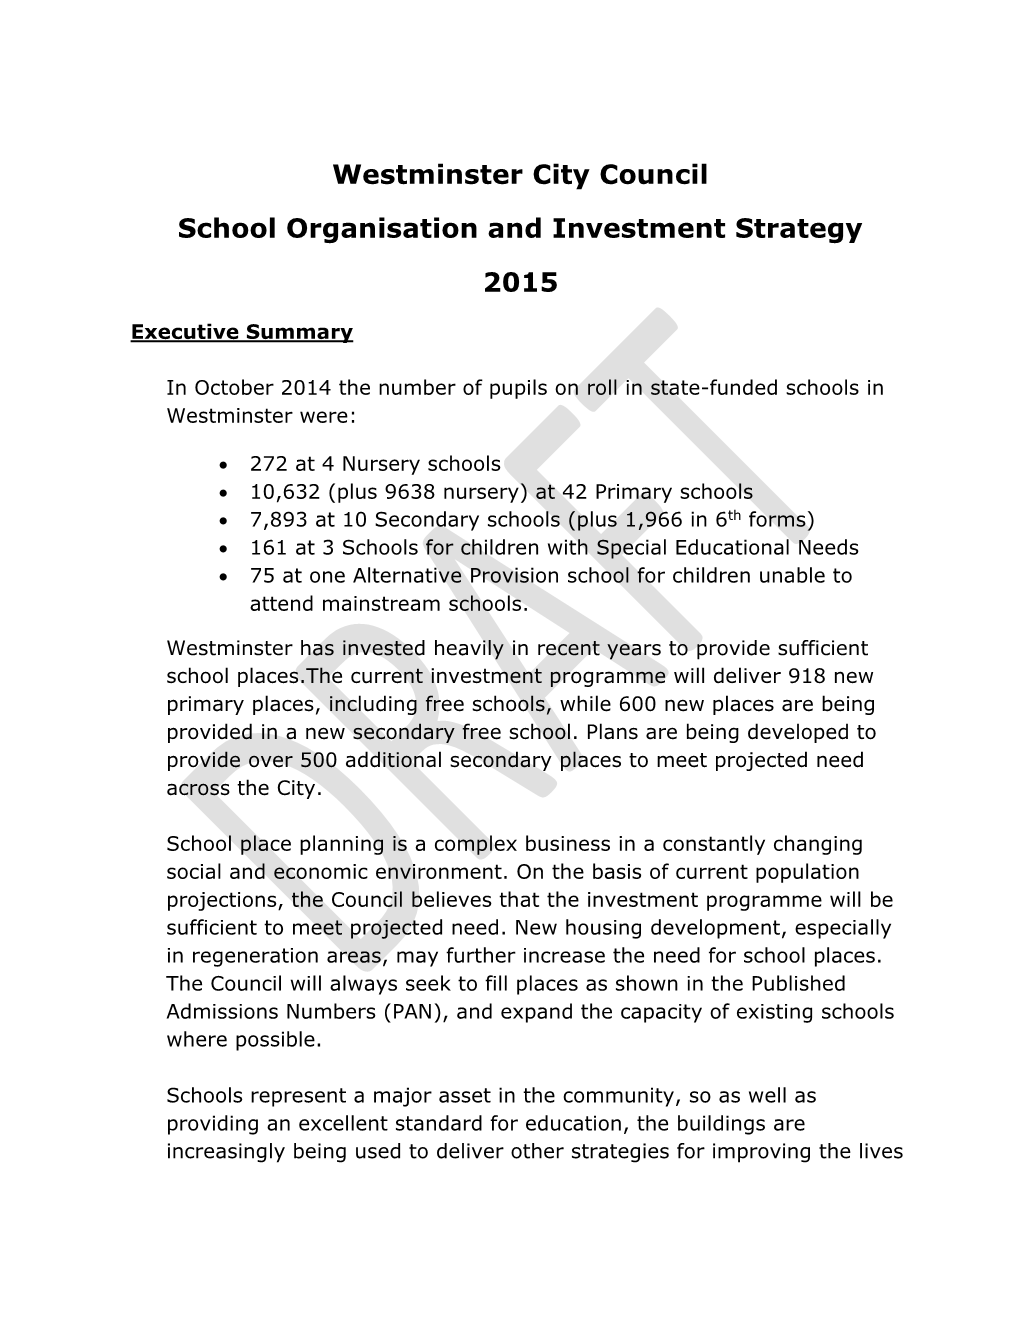 Westminster City Council School Organisation and Investment